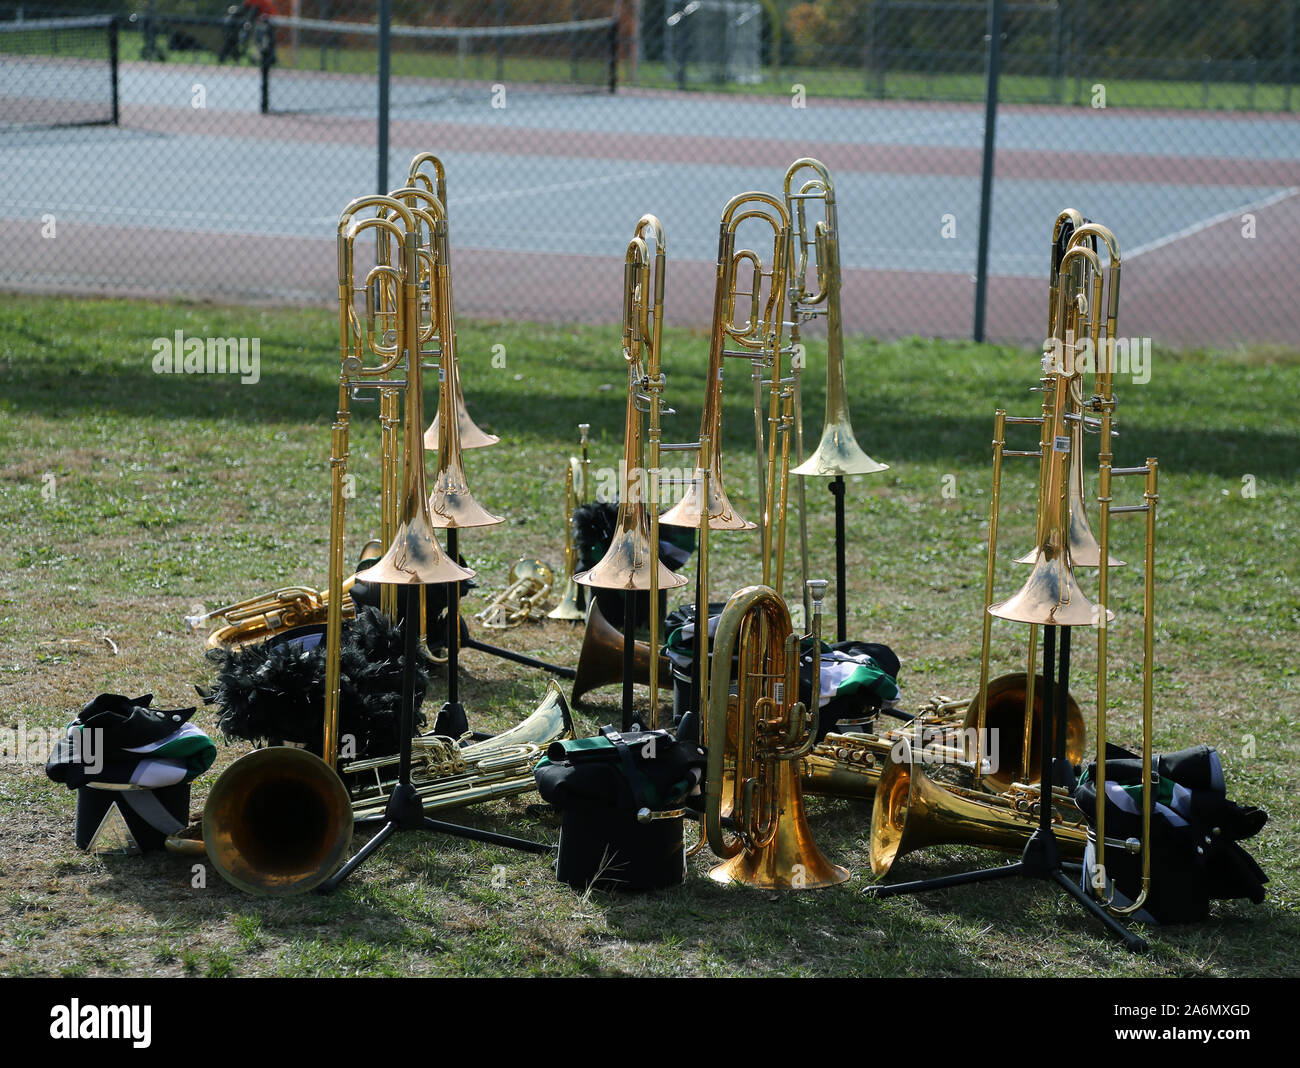 Trombones on a field at a high school pep rally Stock Photo